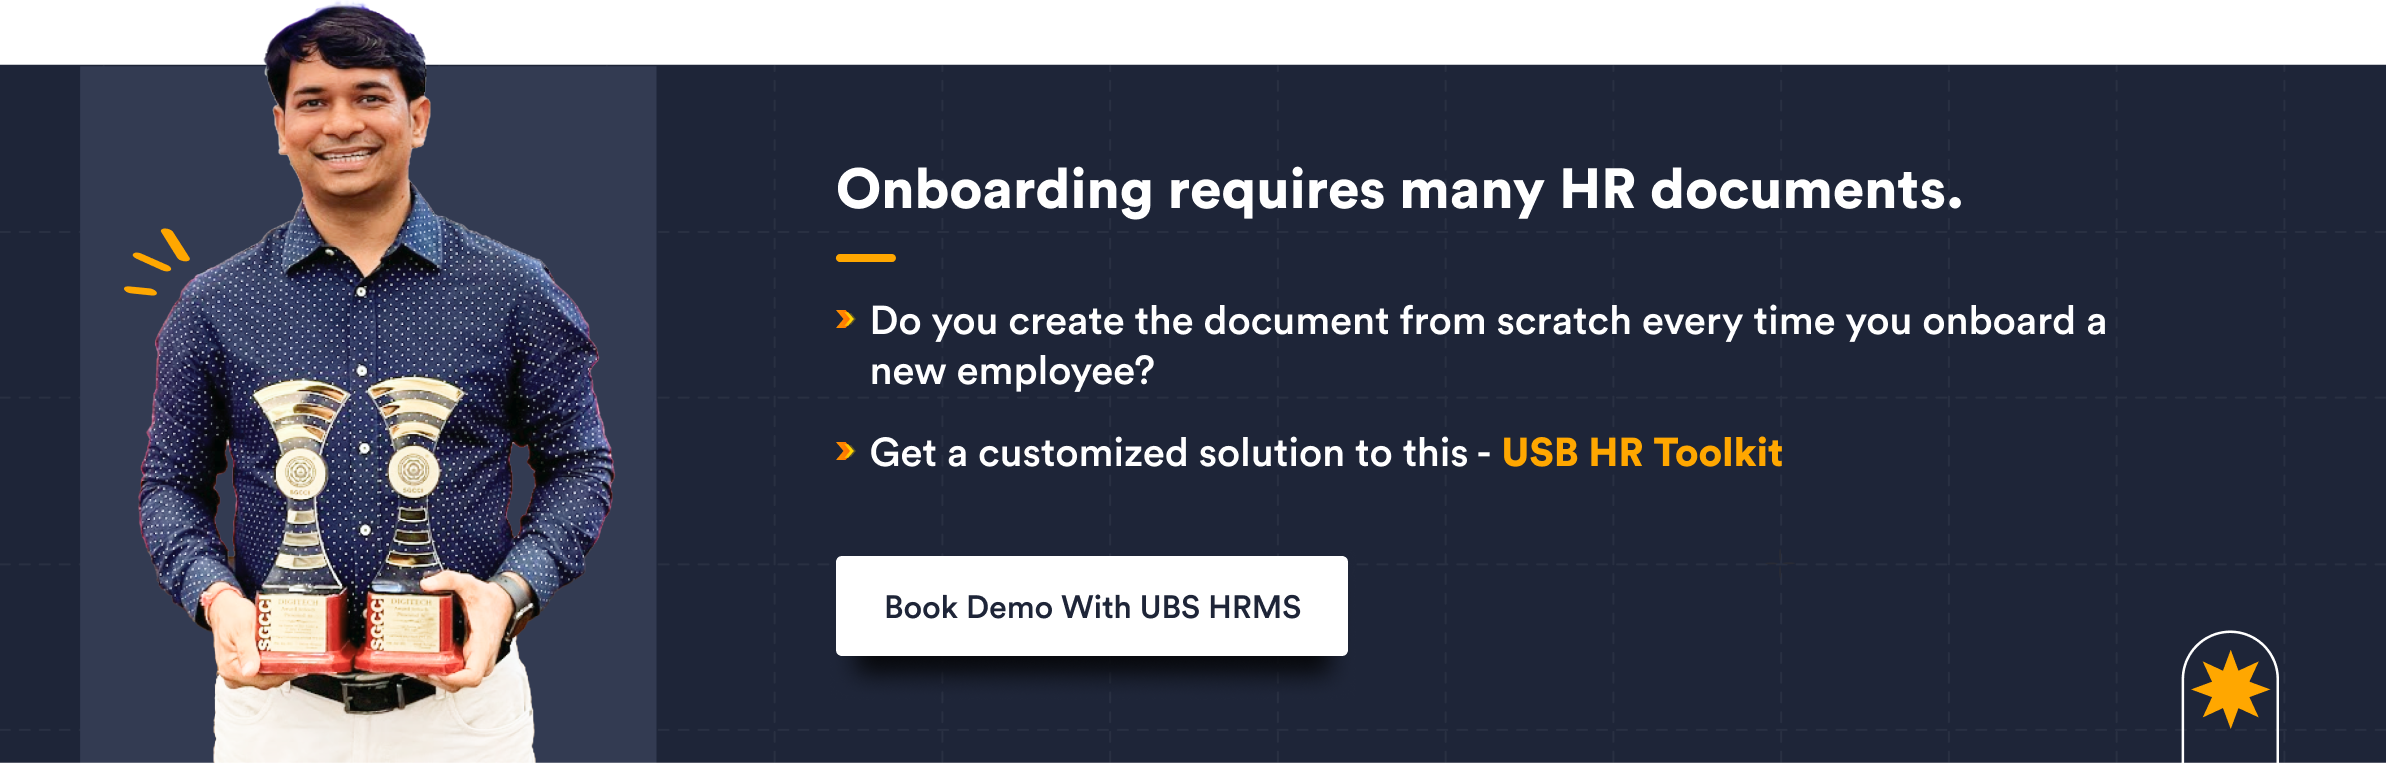 Onboarding requires many HR documents.